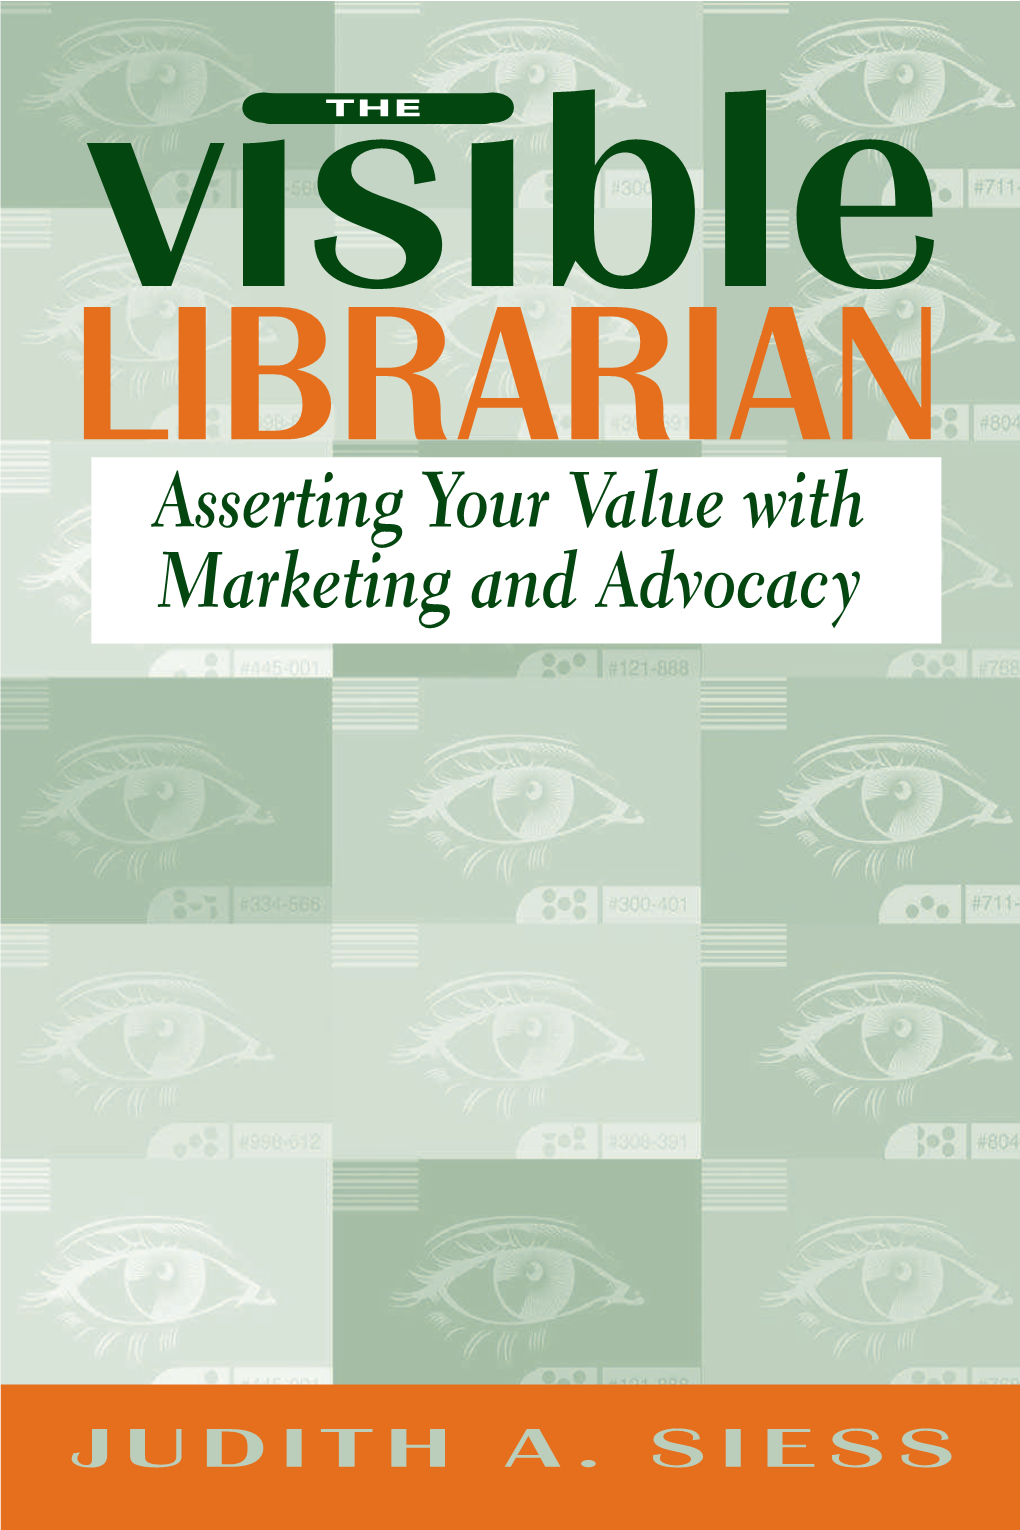 Asserting Your Value with Marketing and Advocacy